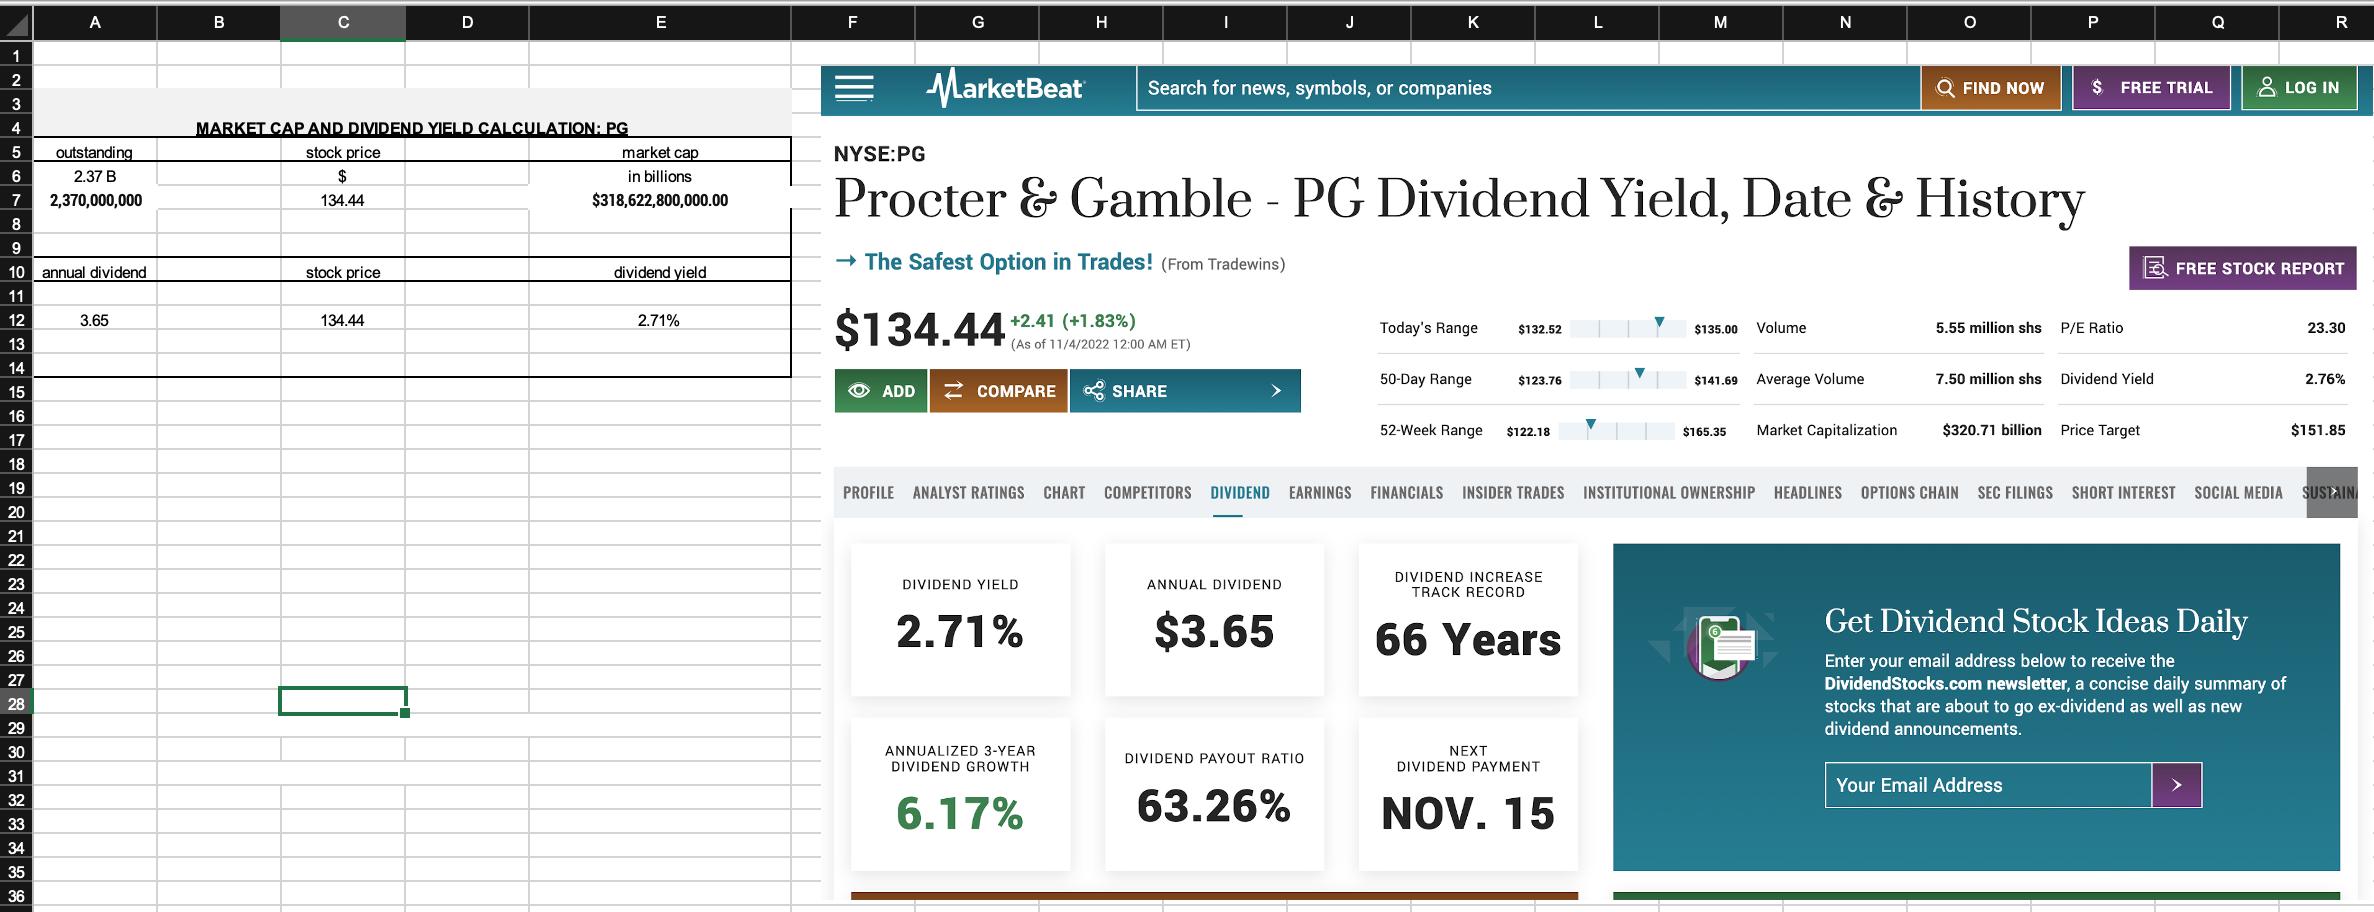 rocter & Gamble - PG Dividend Yield, Date E Histor